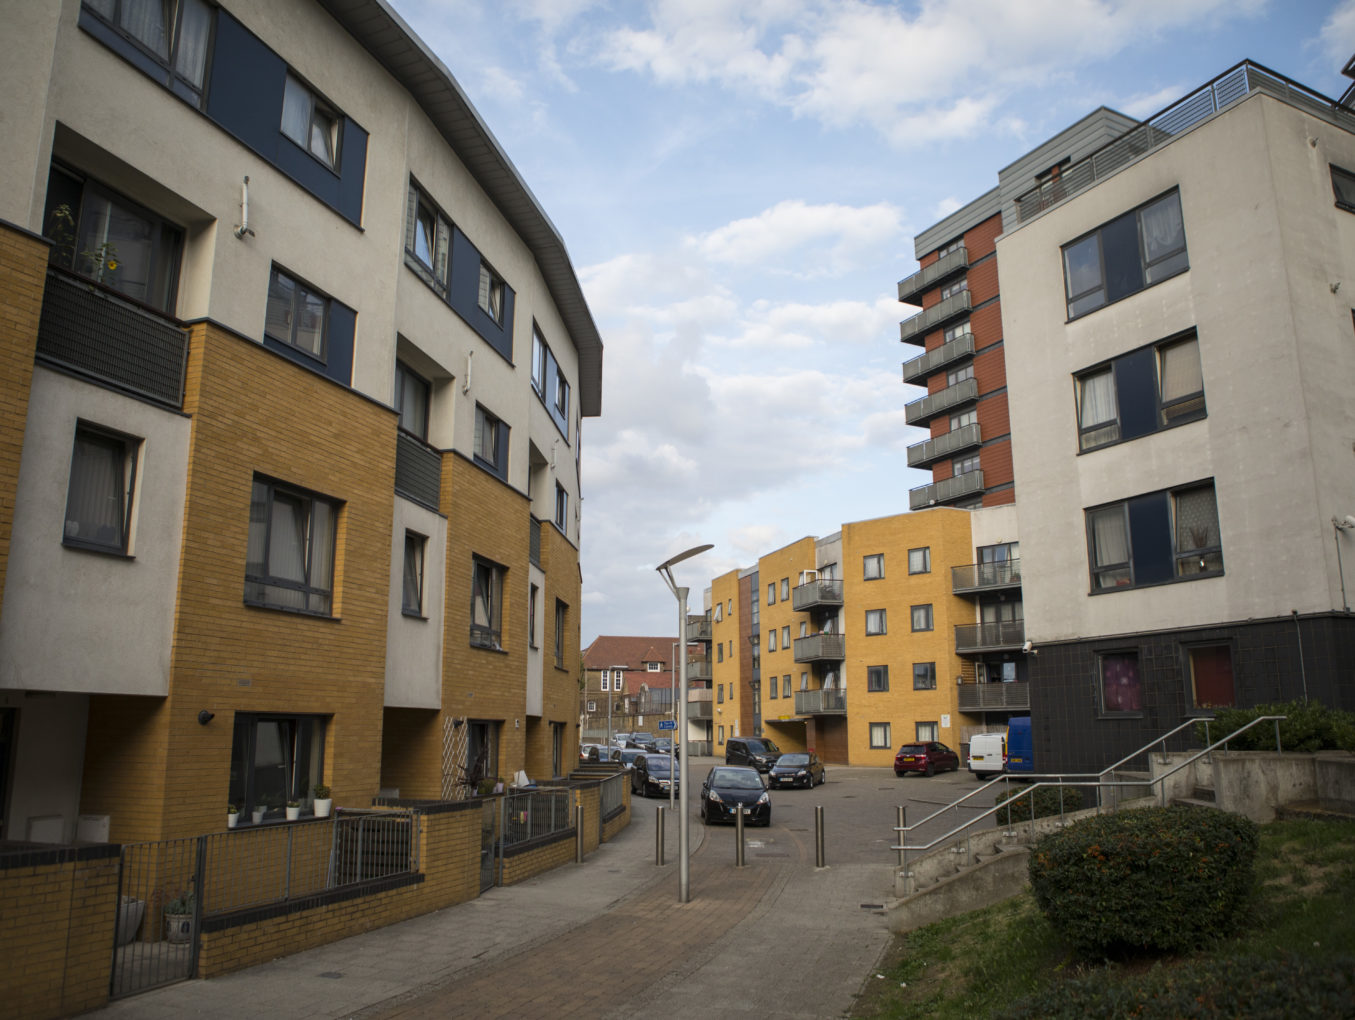 Why investment in social housing needn't wait for planning reform